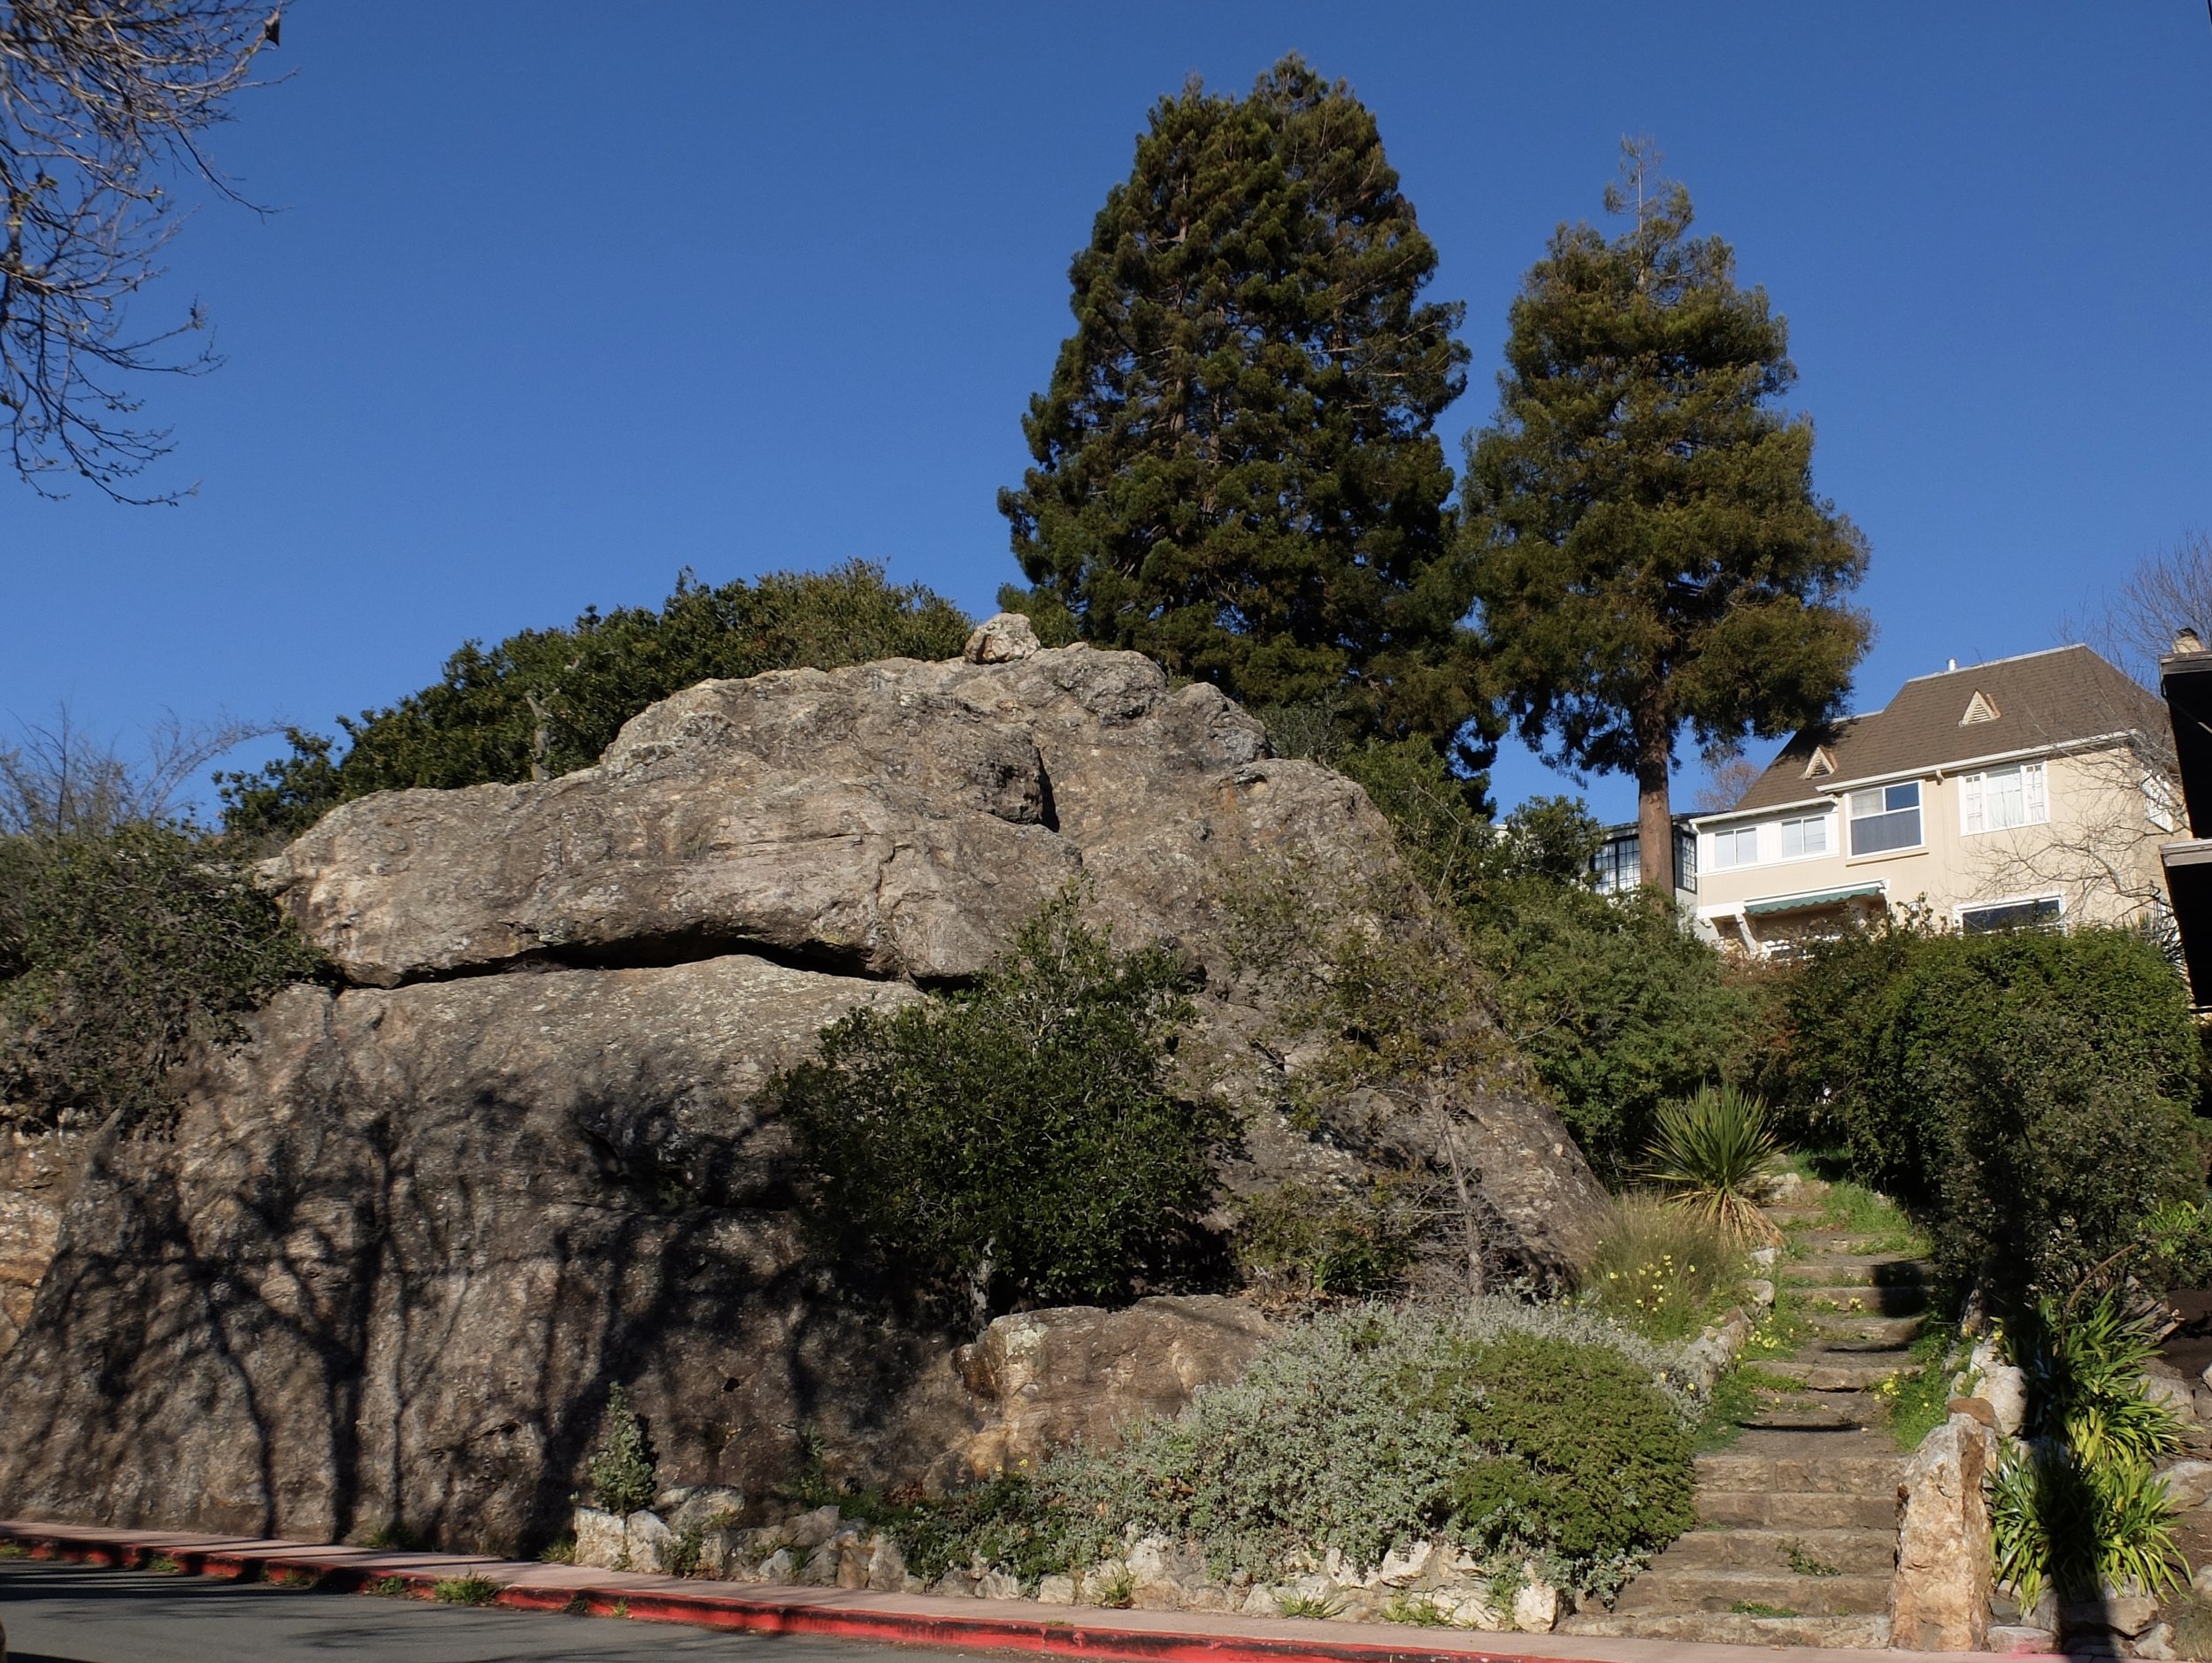 ...Contra Costa Rock.  I climbed the steps thinking it would take me over but it took me around the rock.  It's a designated Berkeley city park.